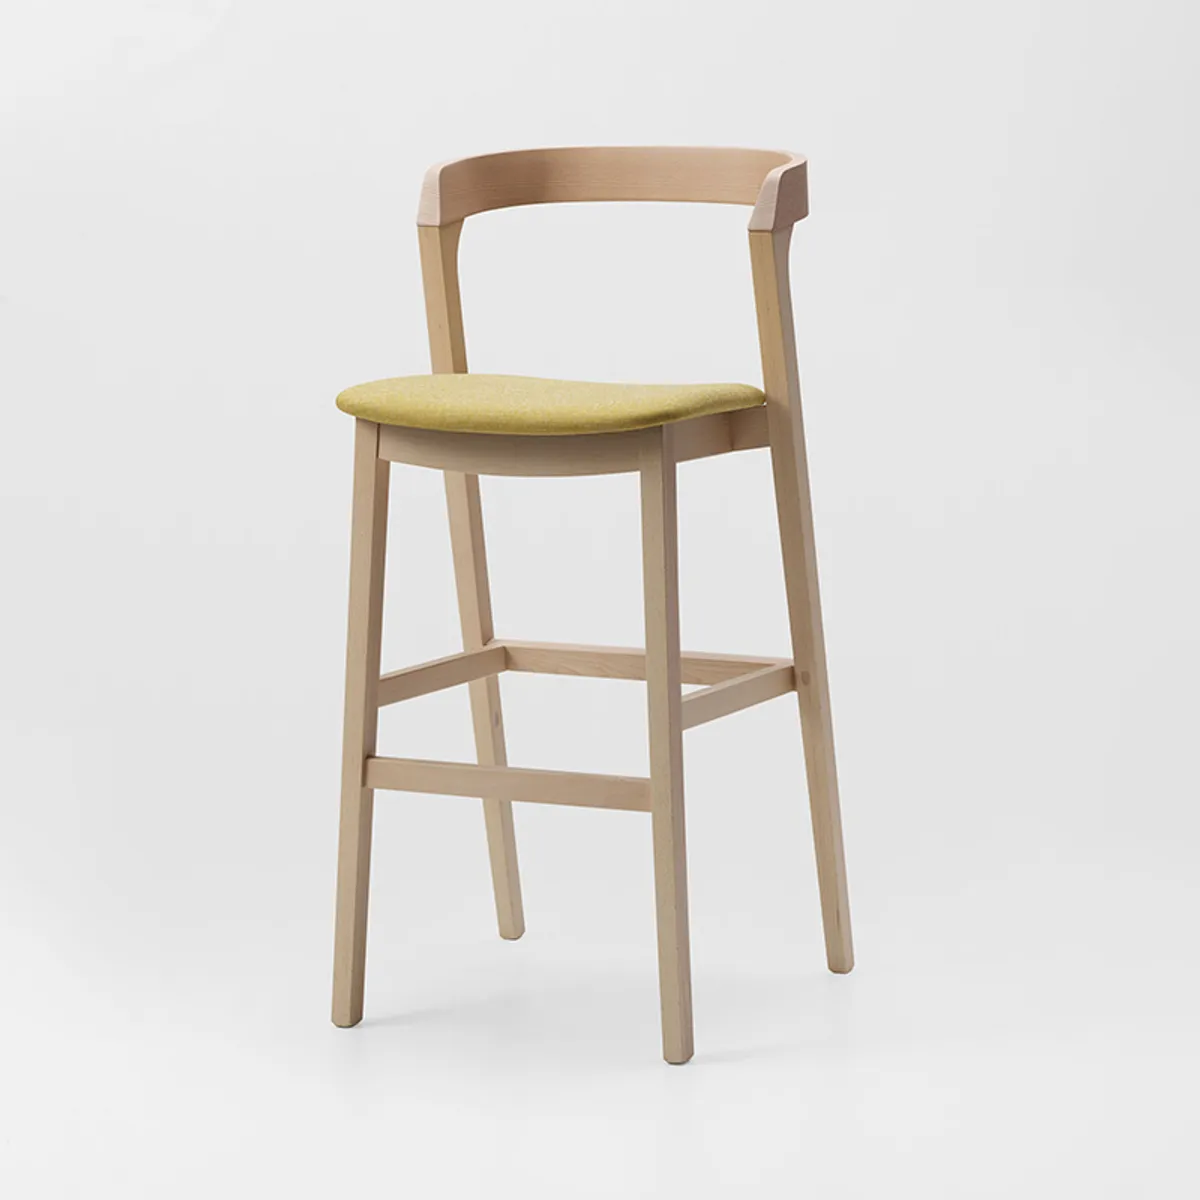 Crest Bar Stool Cafe Furniture Inside Out Contracts 2